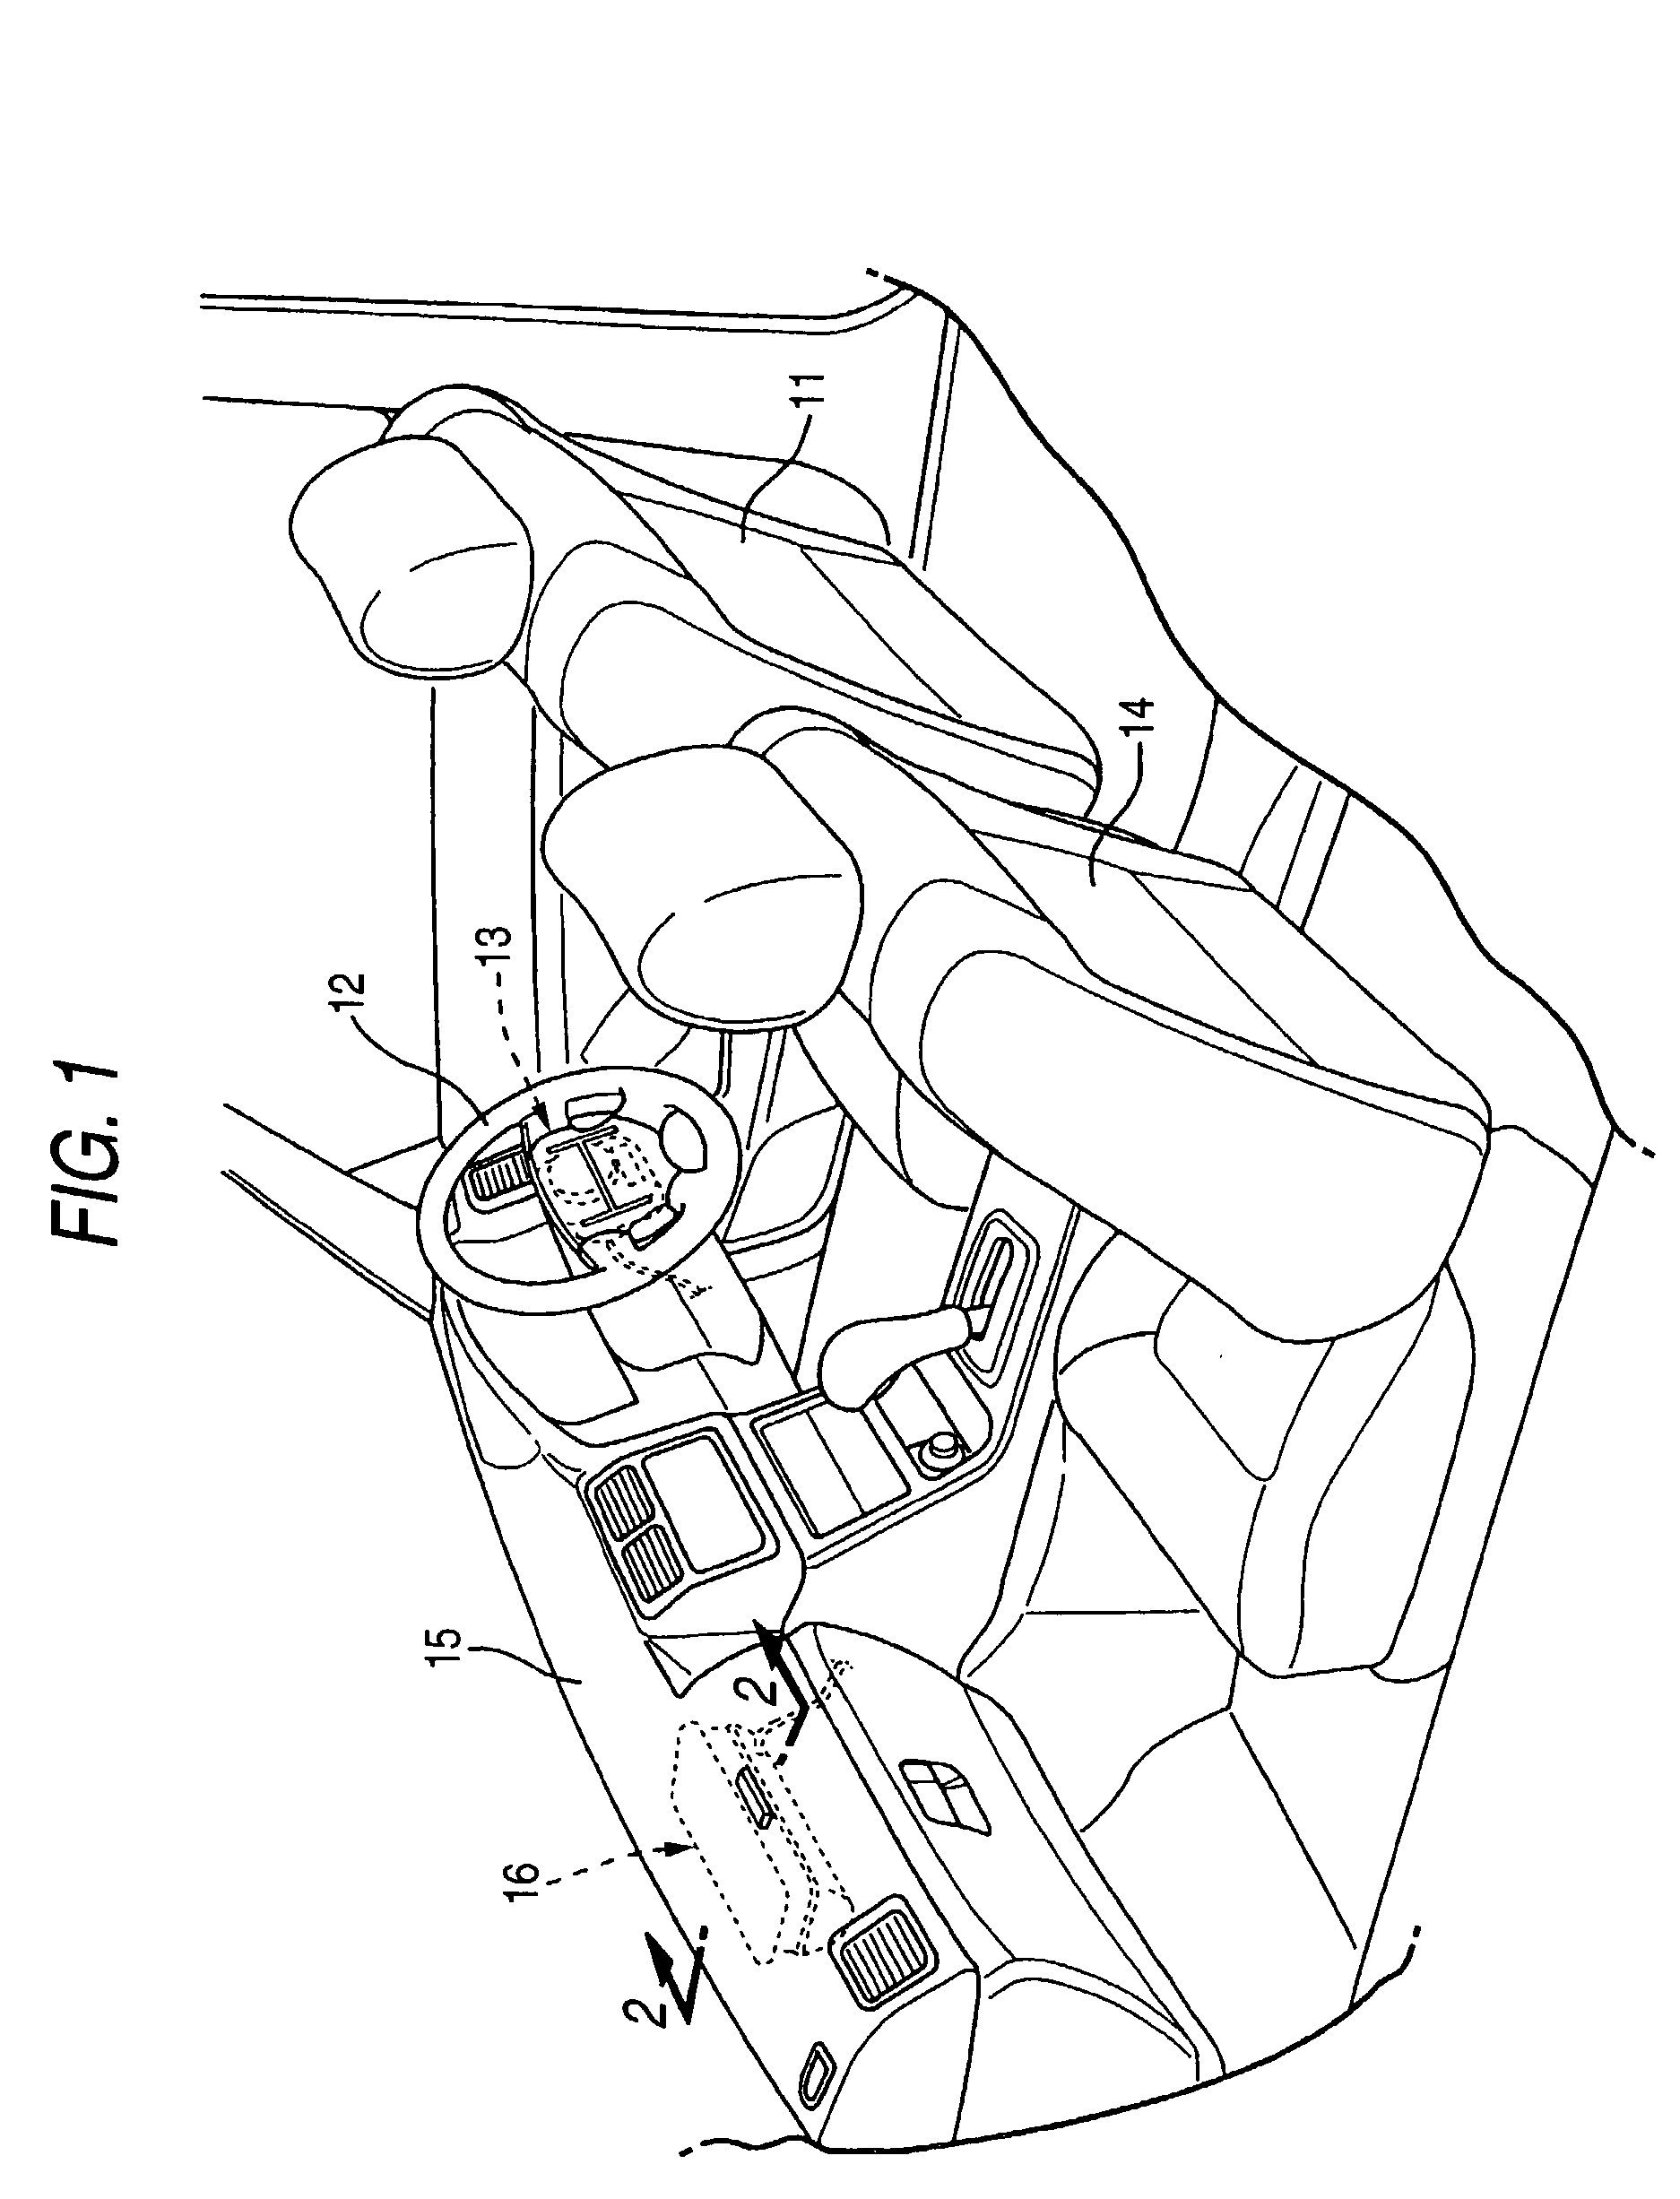 Air bag system mounting structure